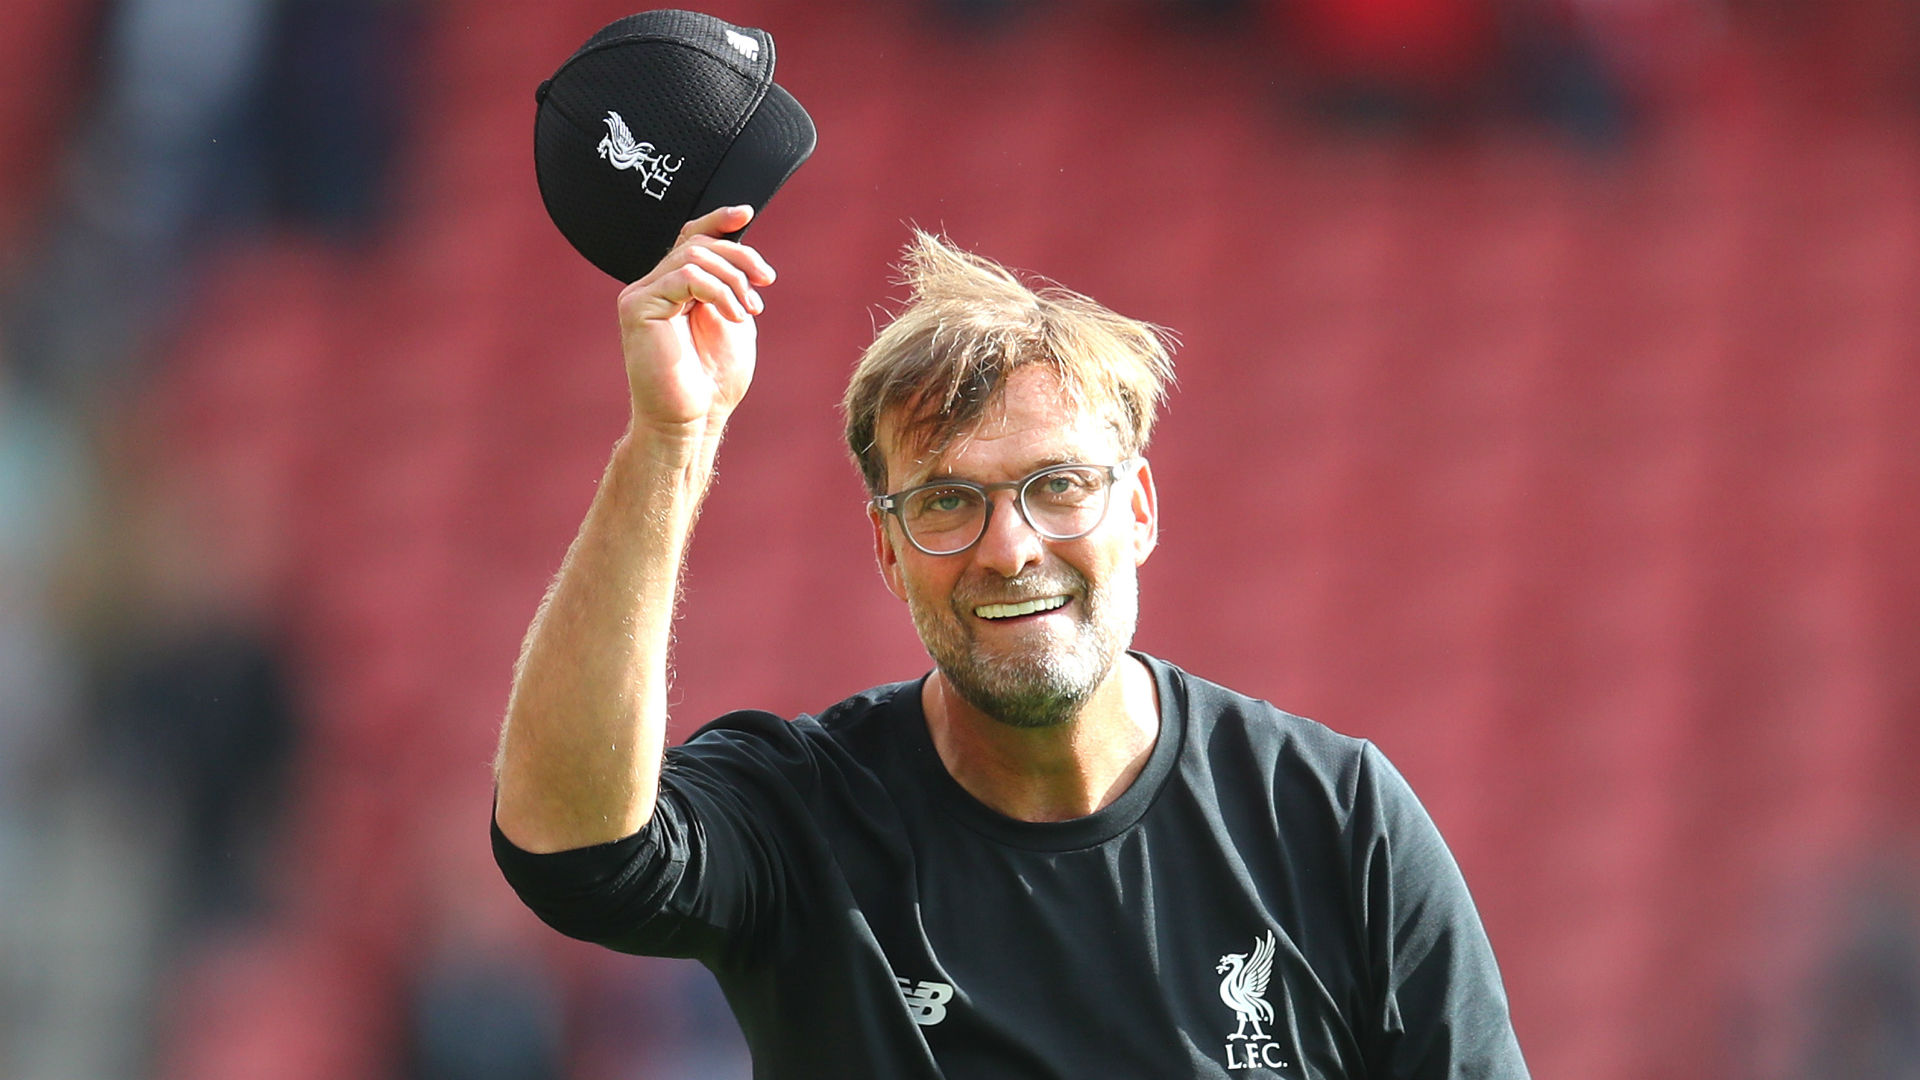 'No one has done better than Klopp' - Ziege says Liverpool boss is 'best in the world' ahead of Guardiola